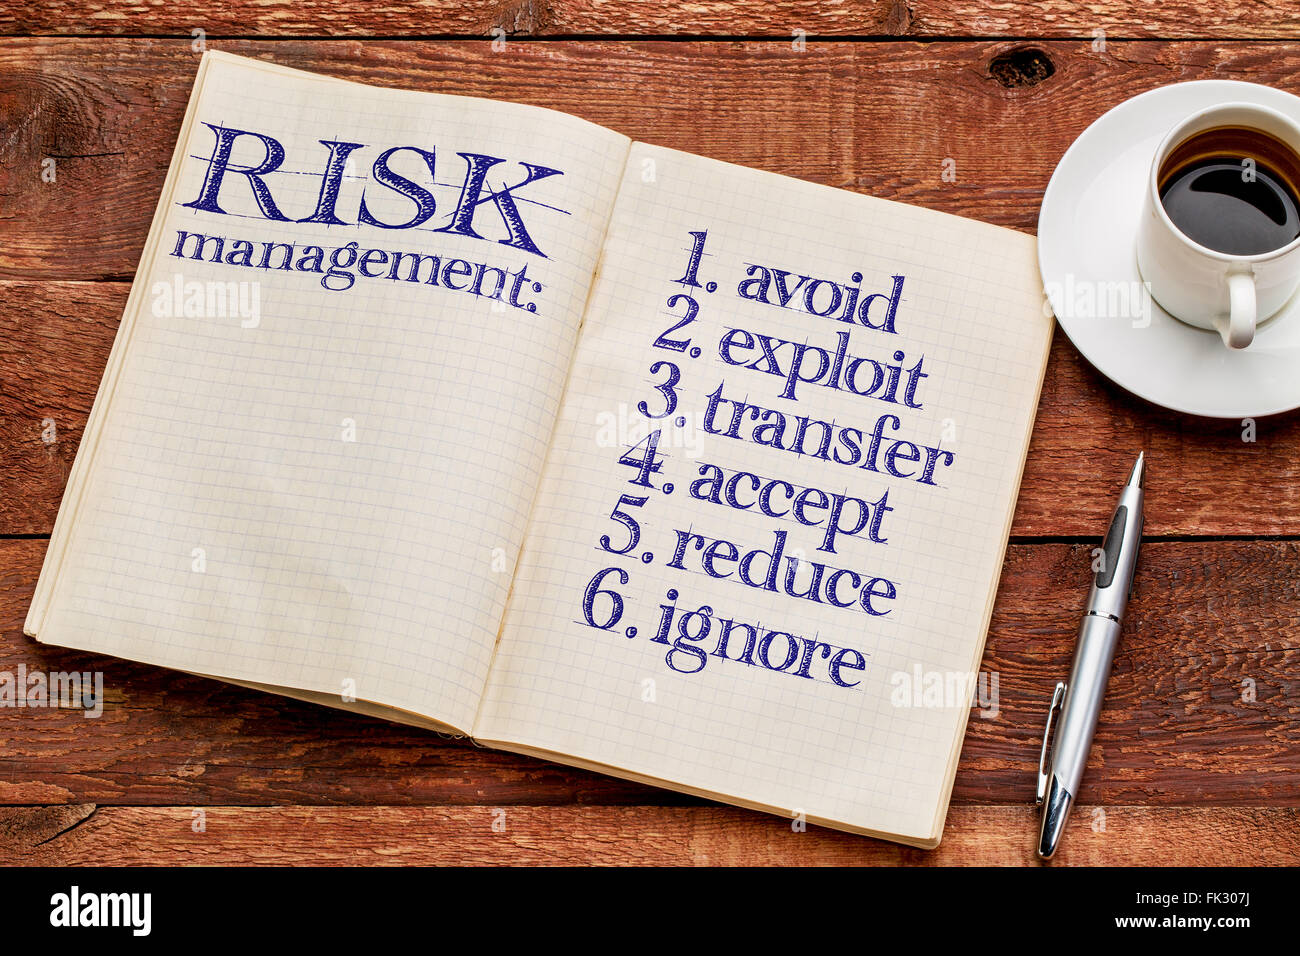 risk management strategies (avoid, exploit, transfer, accept, reduce,ignore) - handwriting in an old notebook Stock Photo